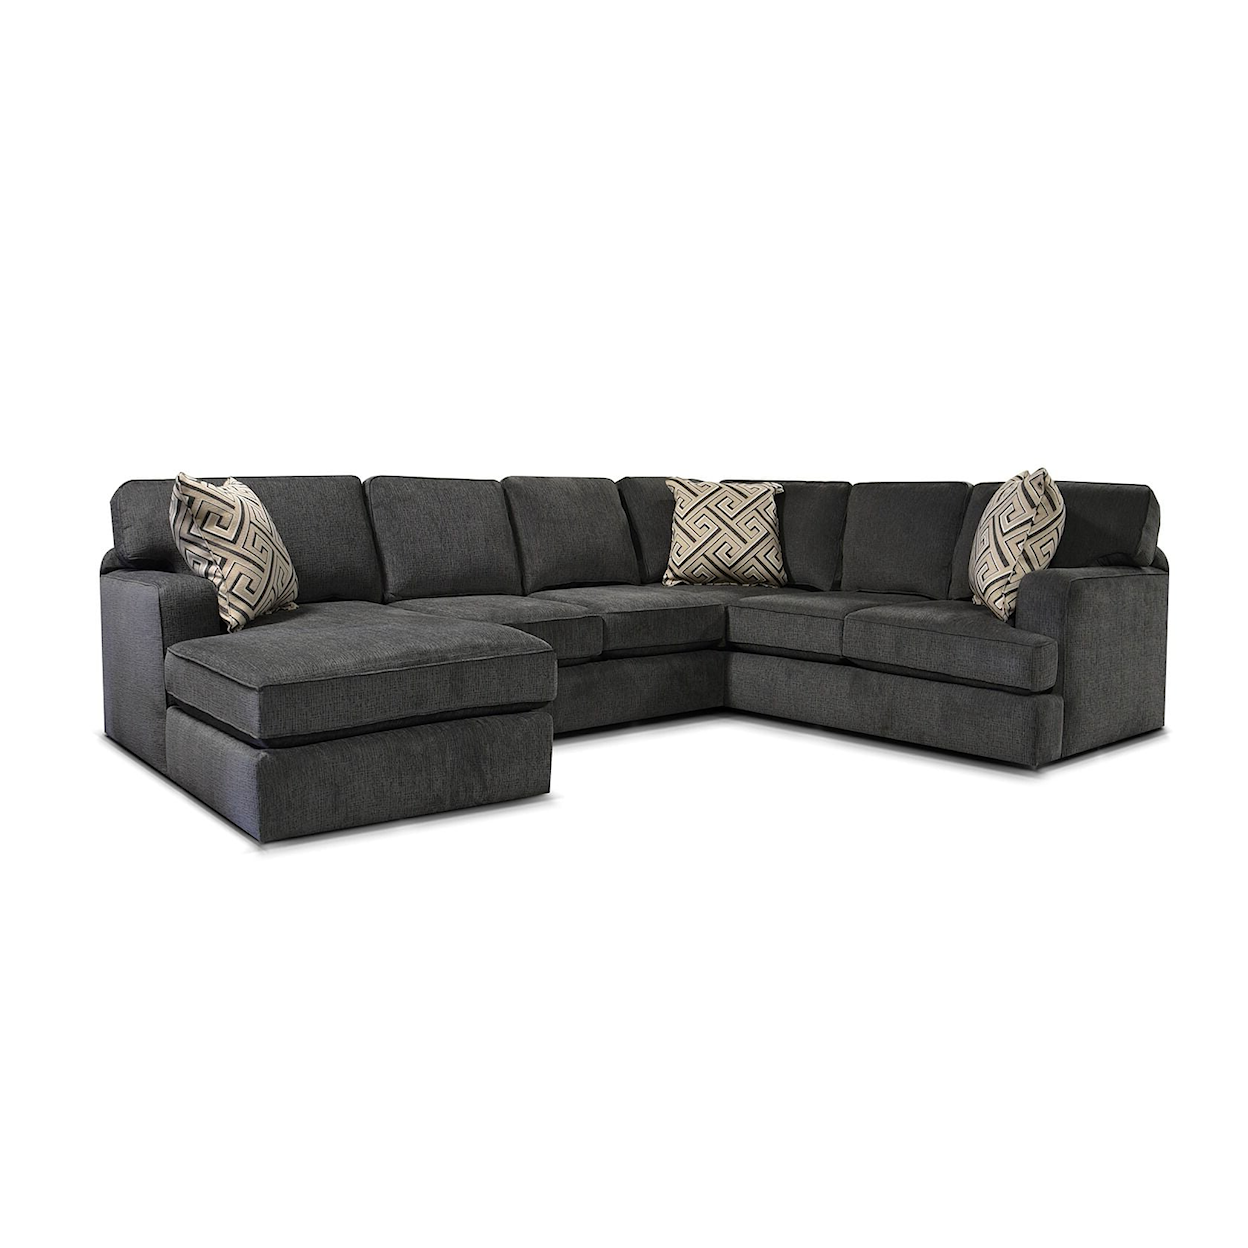 Dimensions 4R00 Series 3-Piece Chaise Sectional Sofa